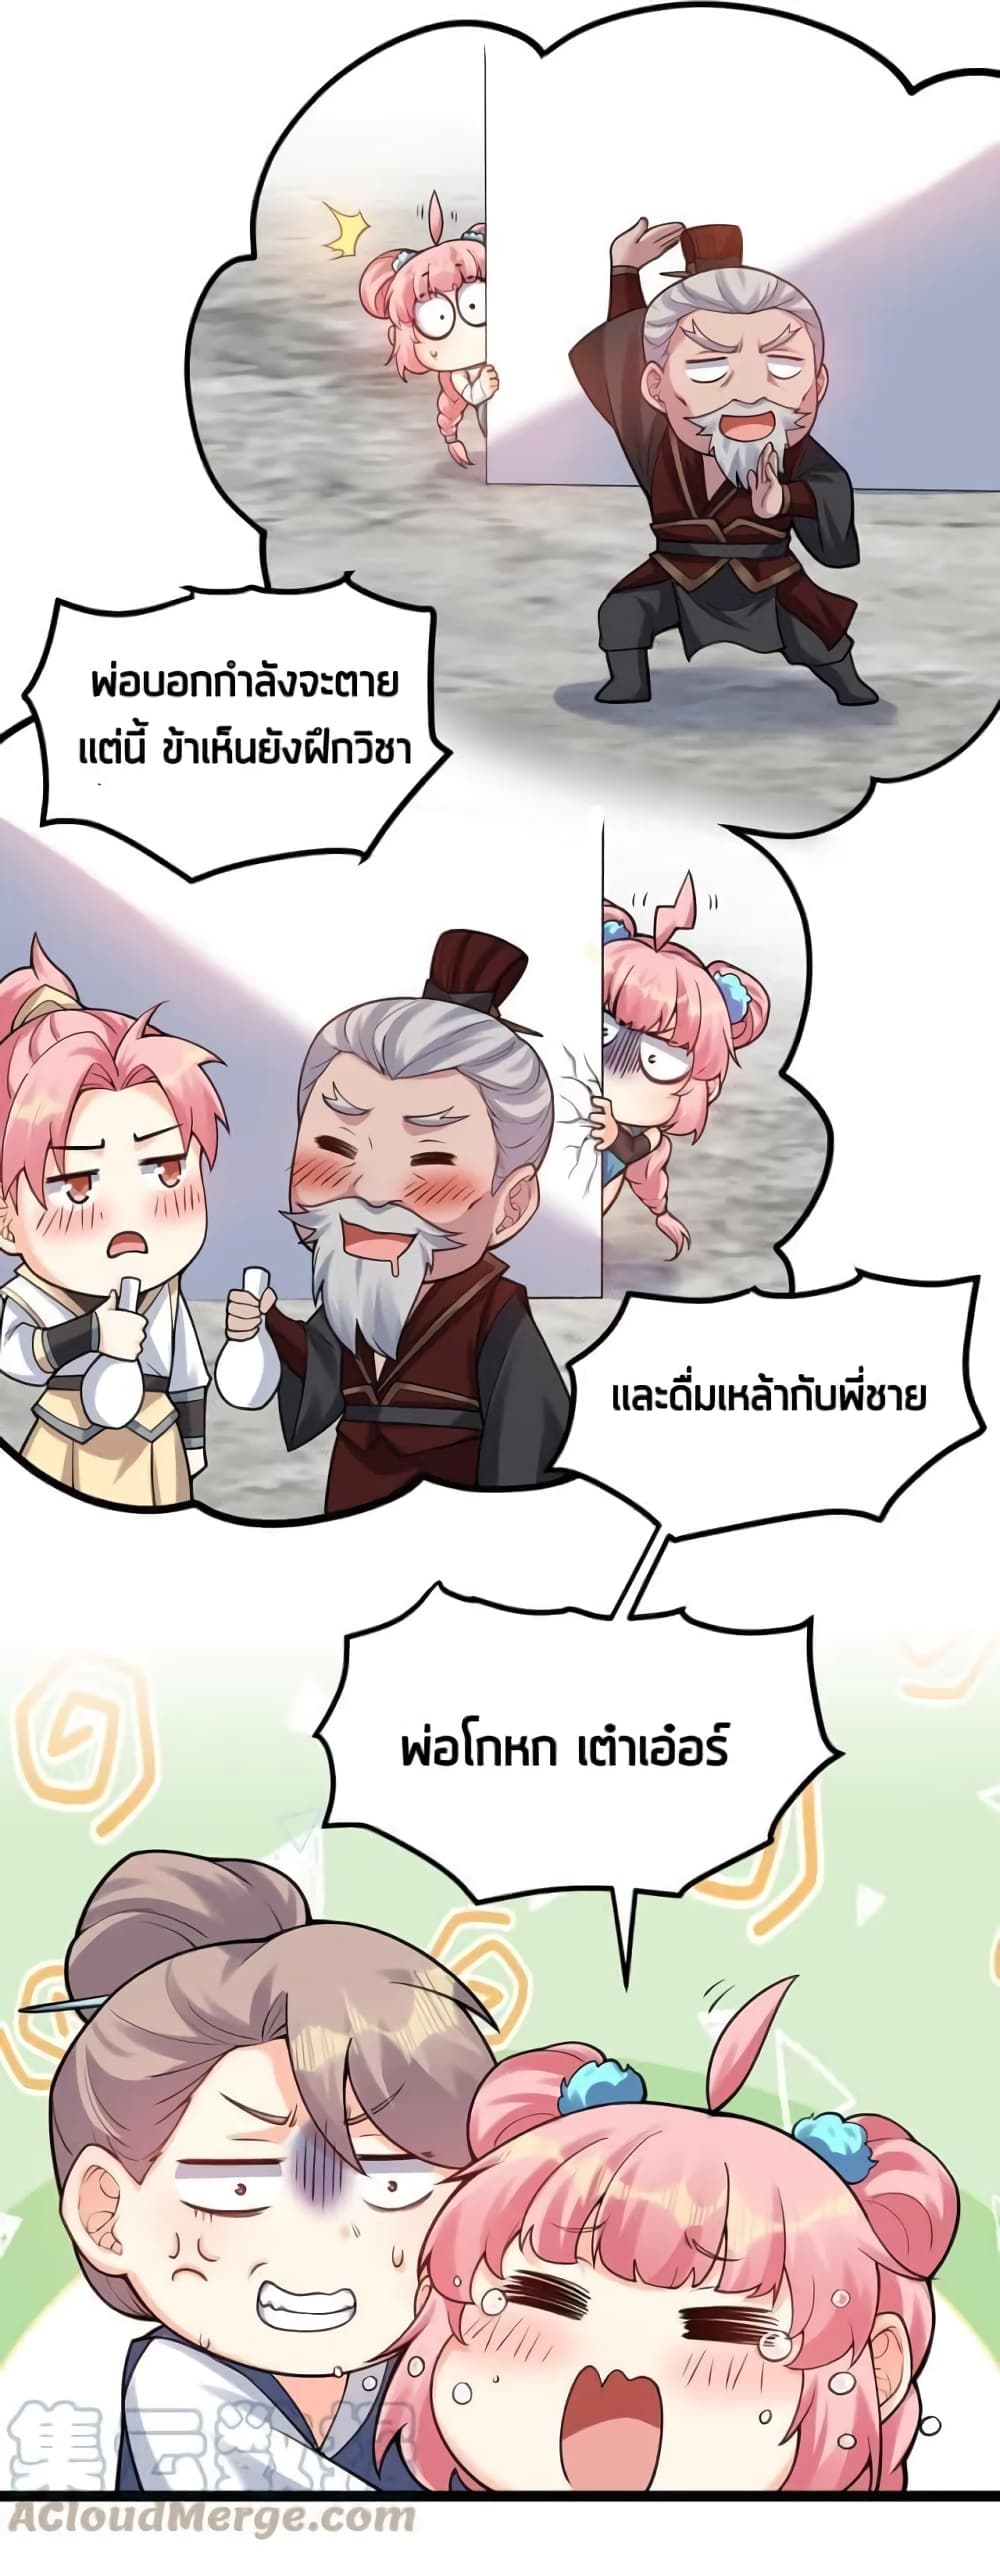 Godsian Masian from Another World ตอนที่ 108 (6)